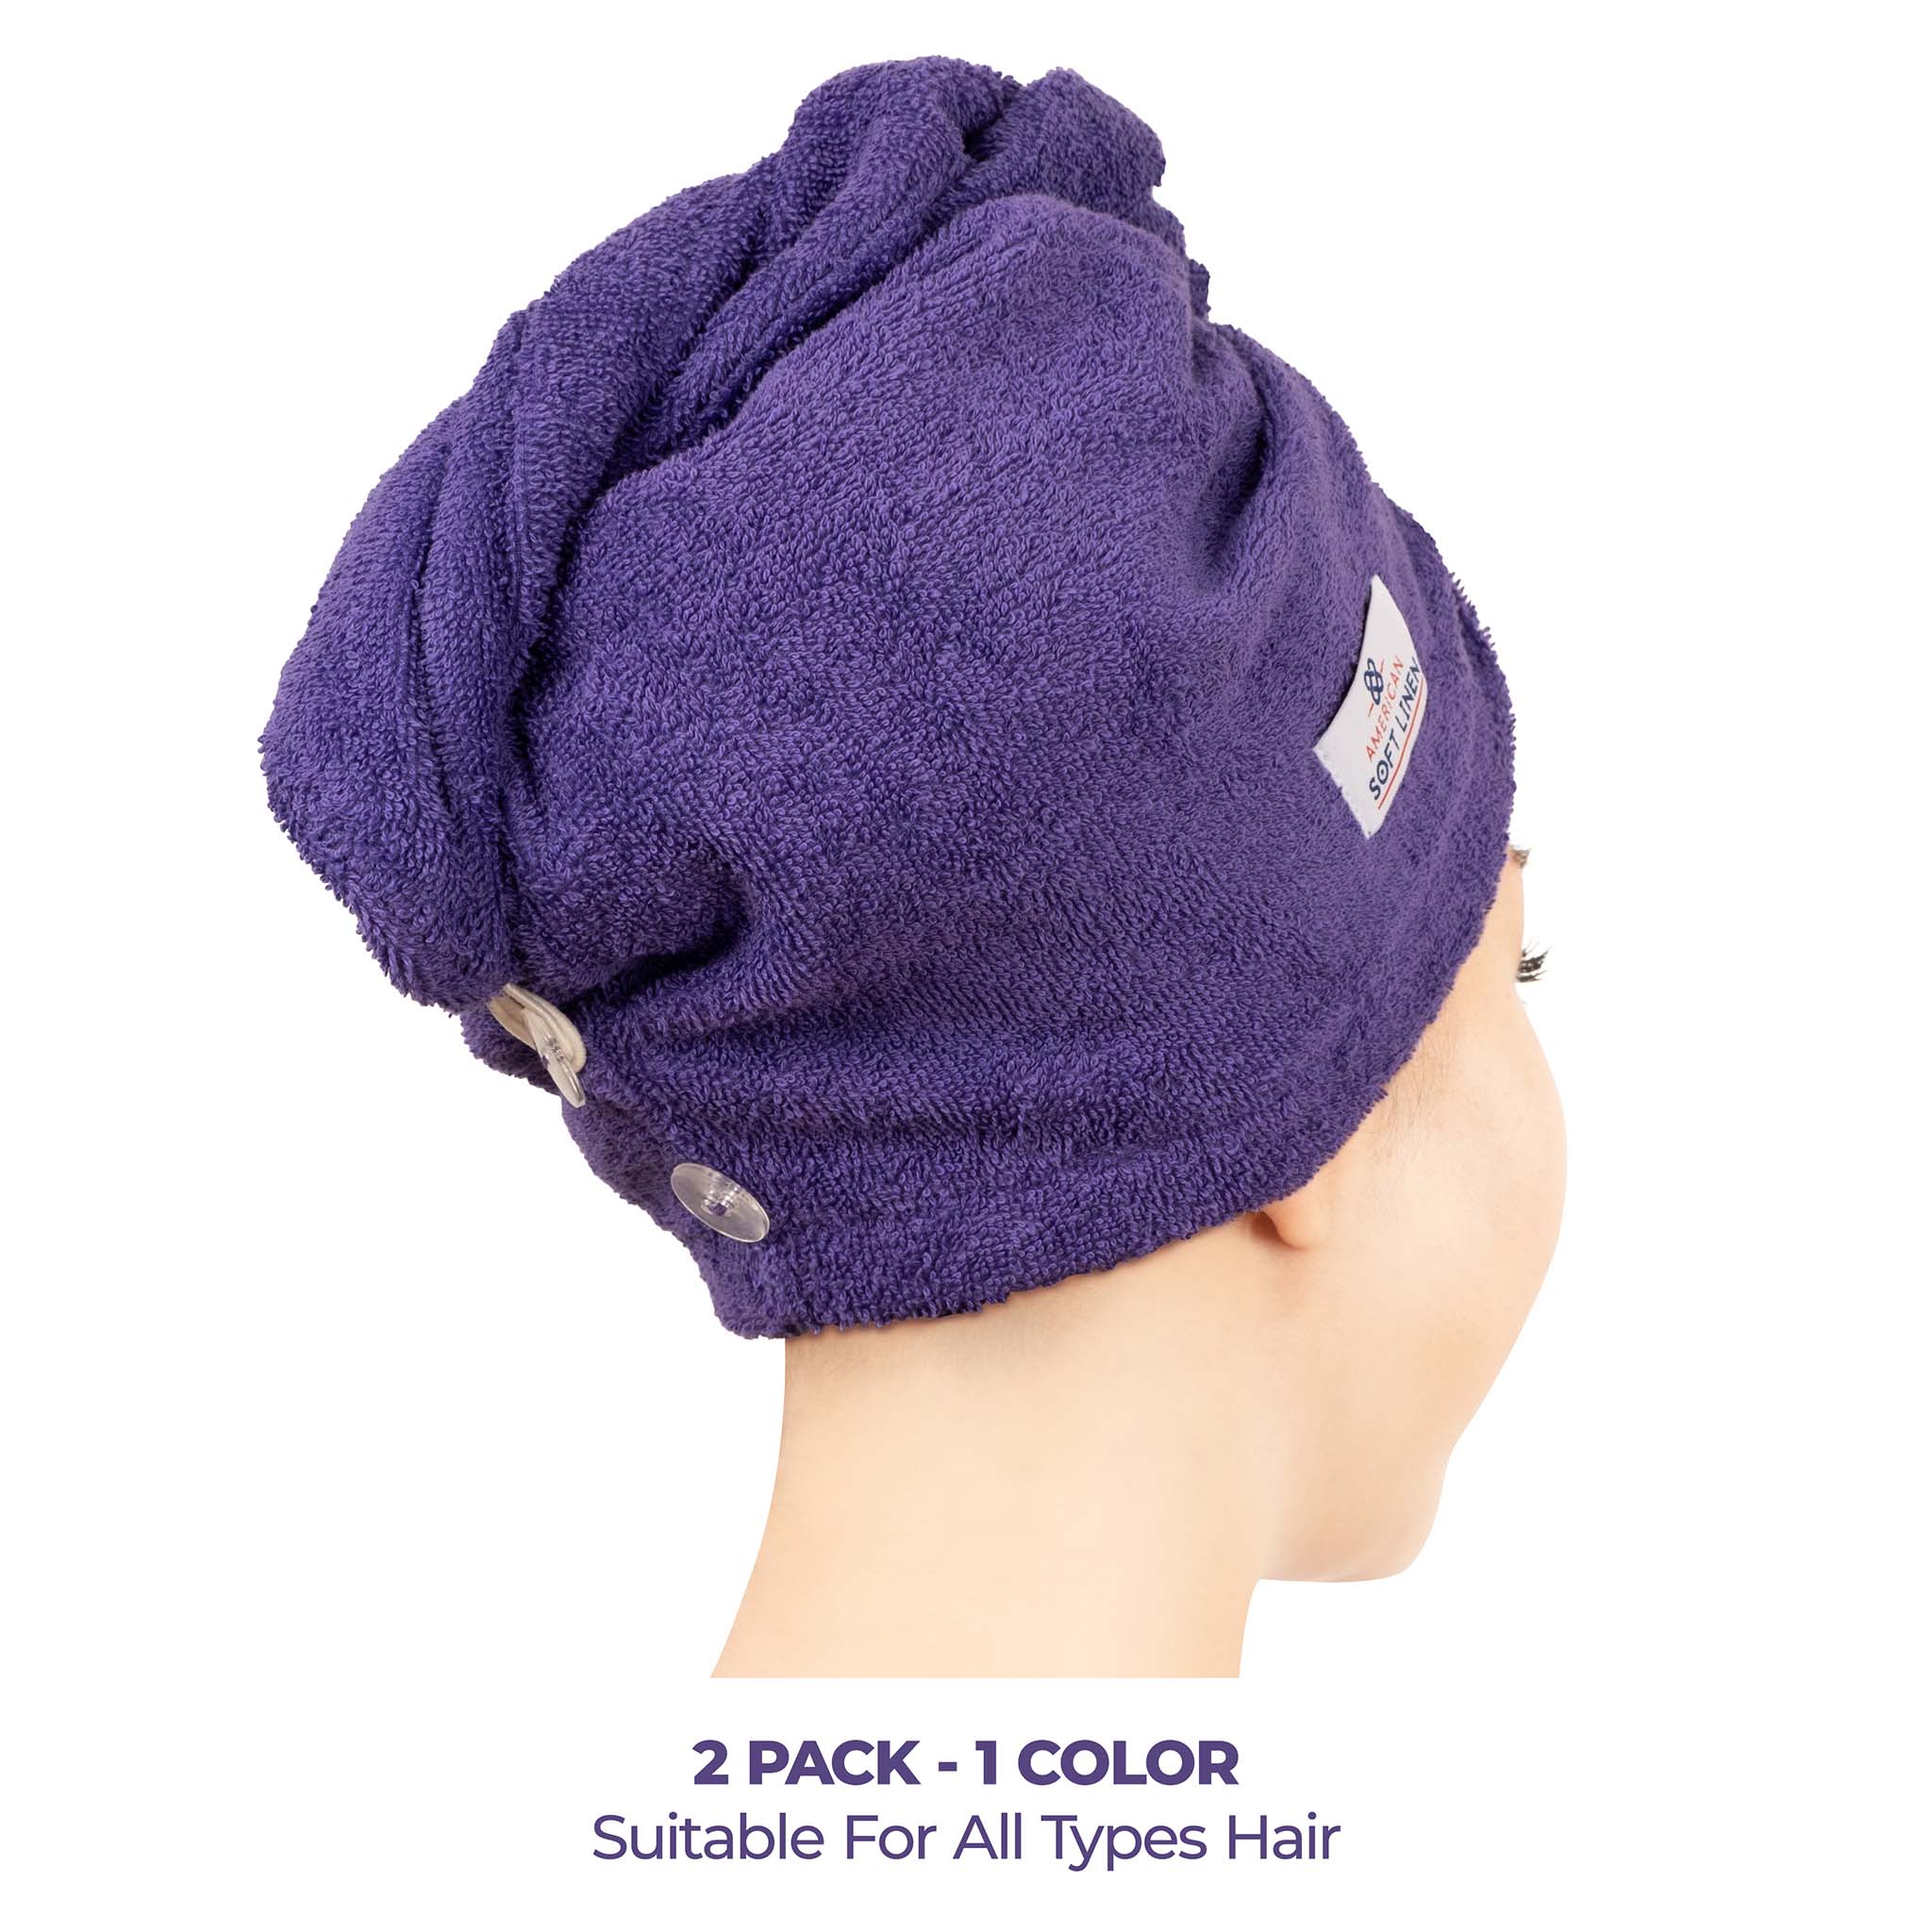 American Soft Linen 100% Cotton Hair Drying Towels for Women 2 pack 75 set case pack purple-3